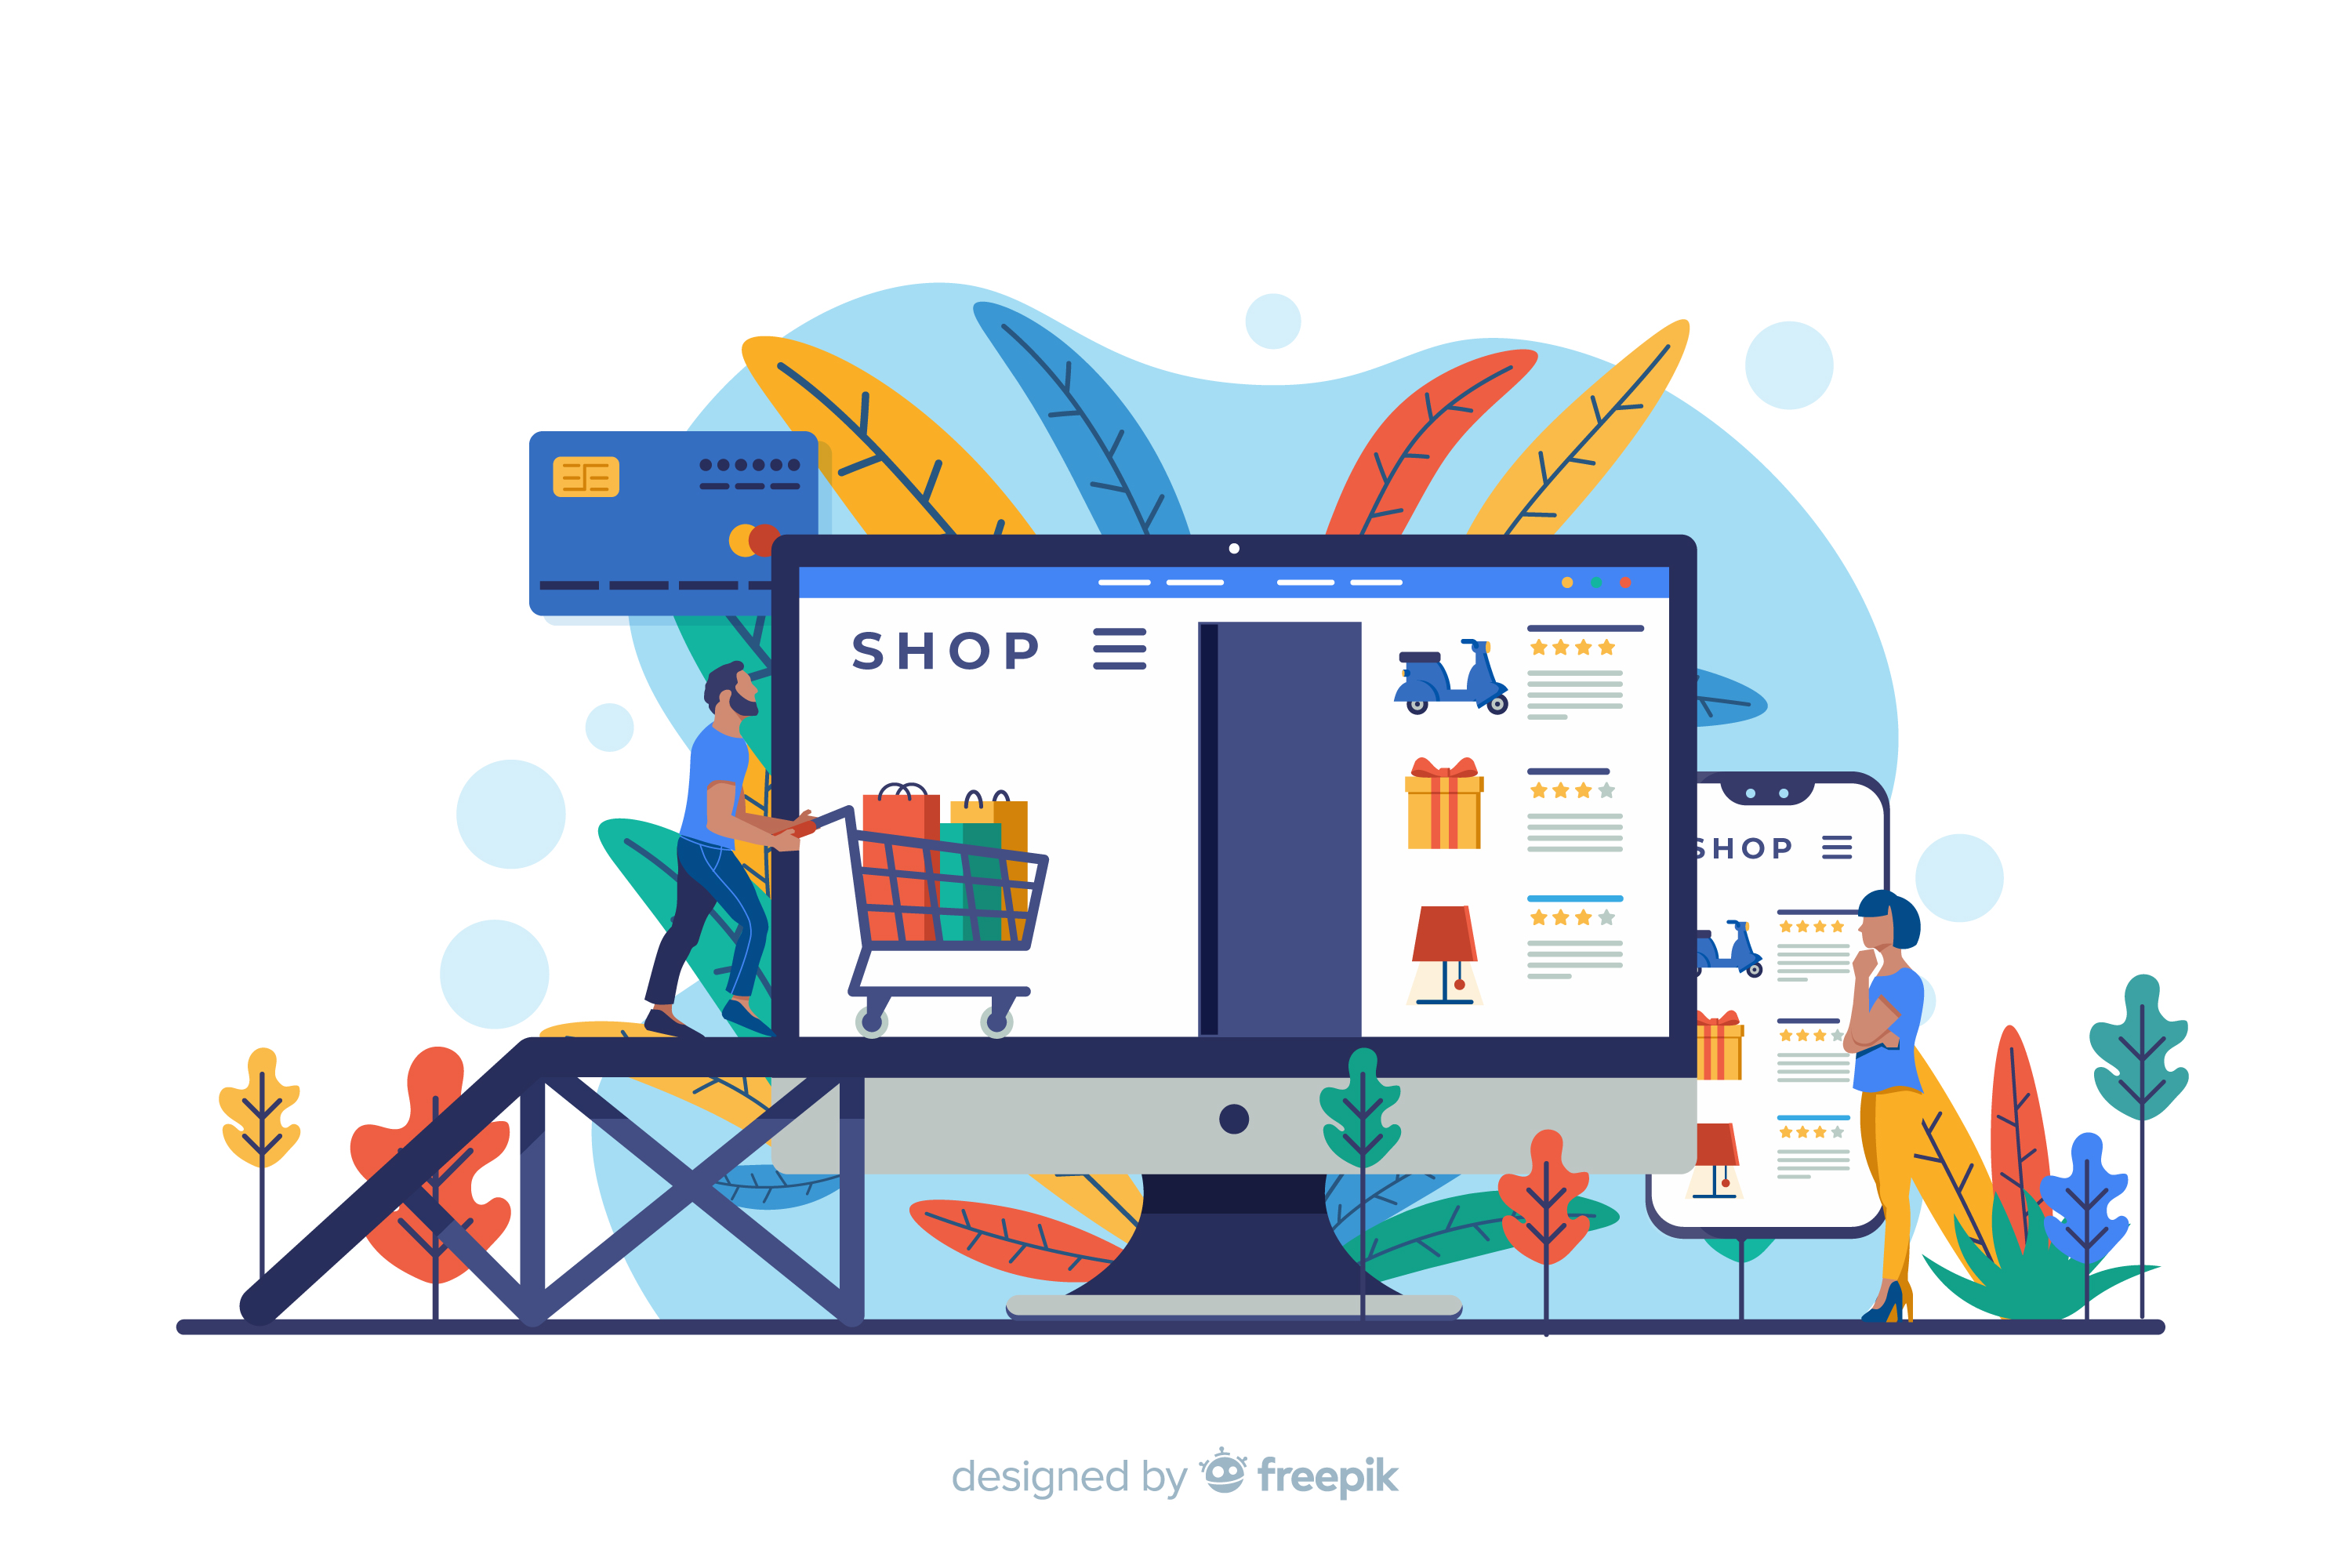 Is Shopify better than Wix